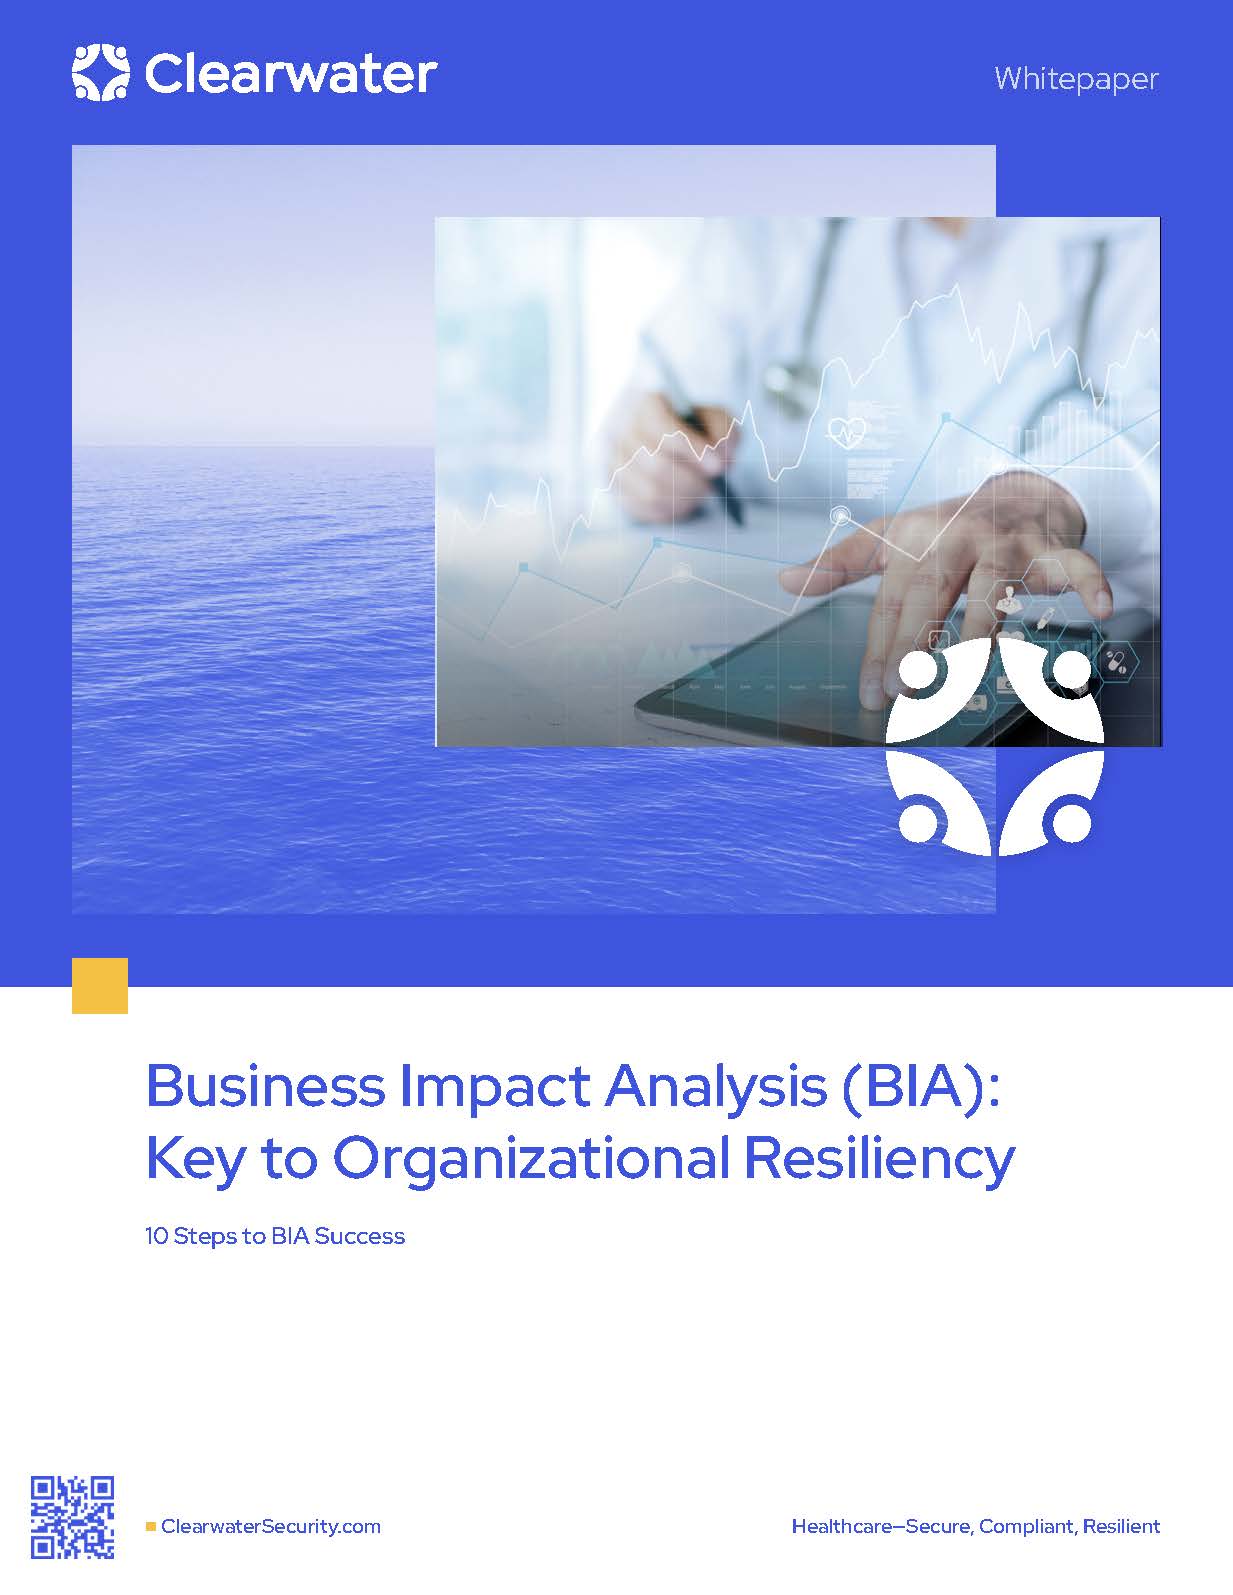 Business Impact Analysis (BIA) - Key to Organizational Resiliency by Clearwater